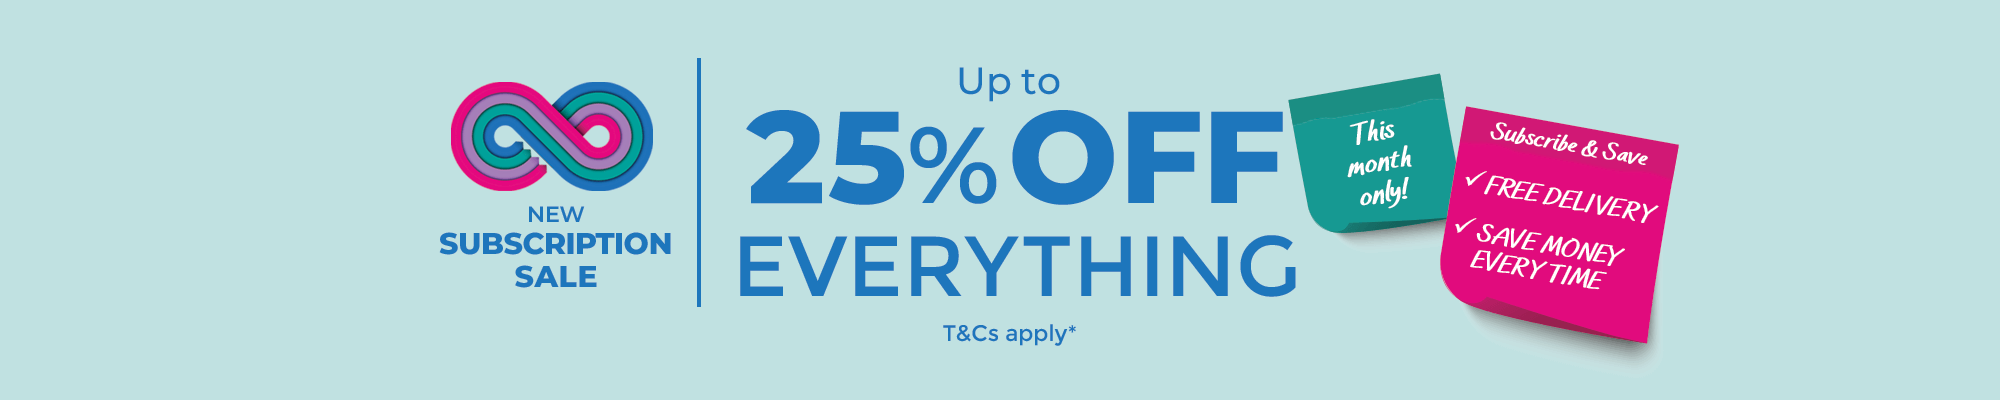 New Subscription Sale. Up to 25% off everything. This month only. Find out more.